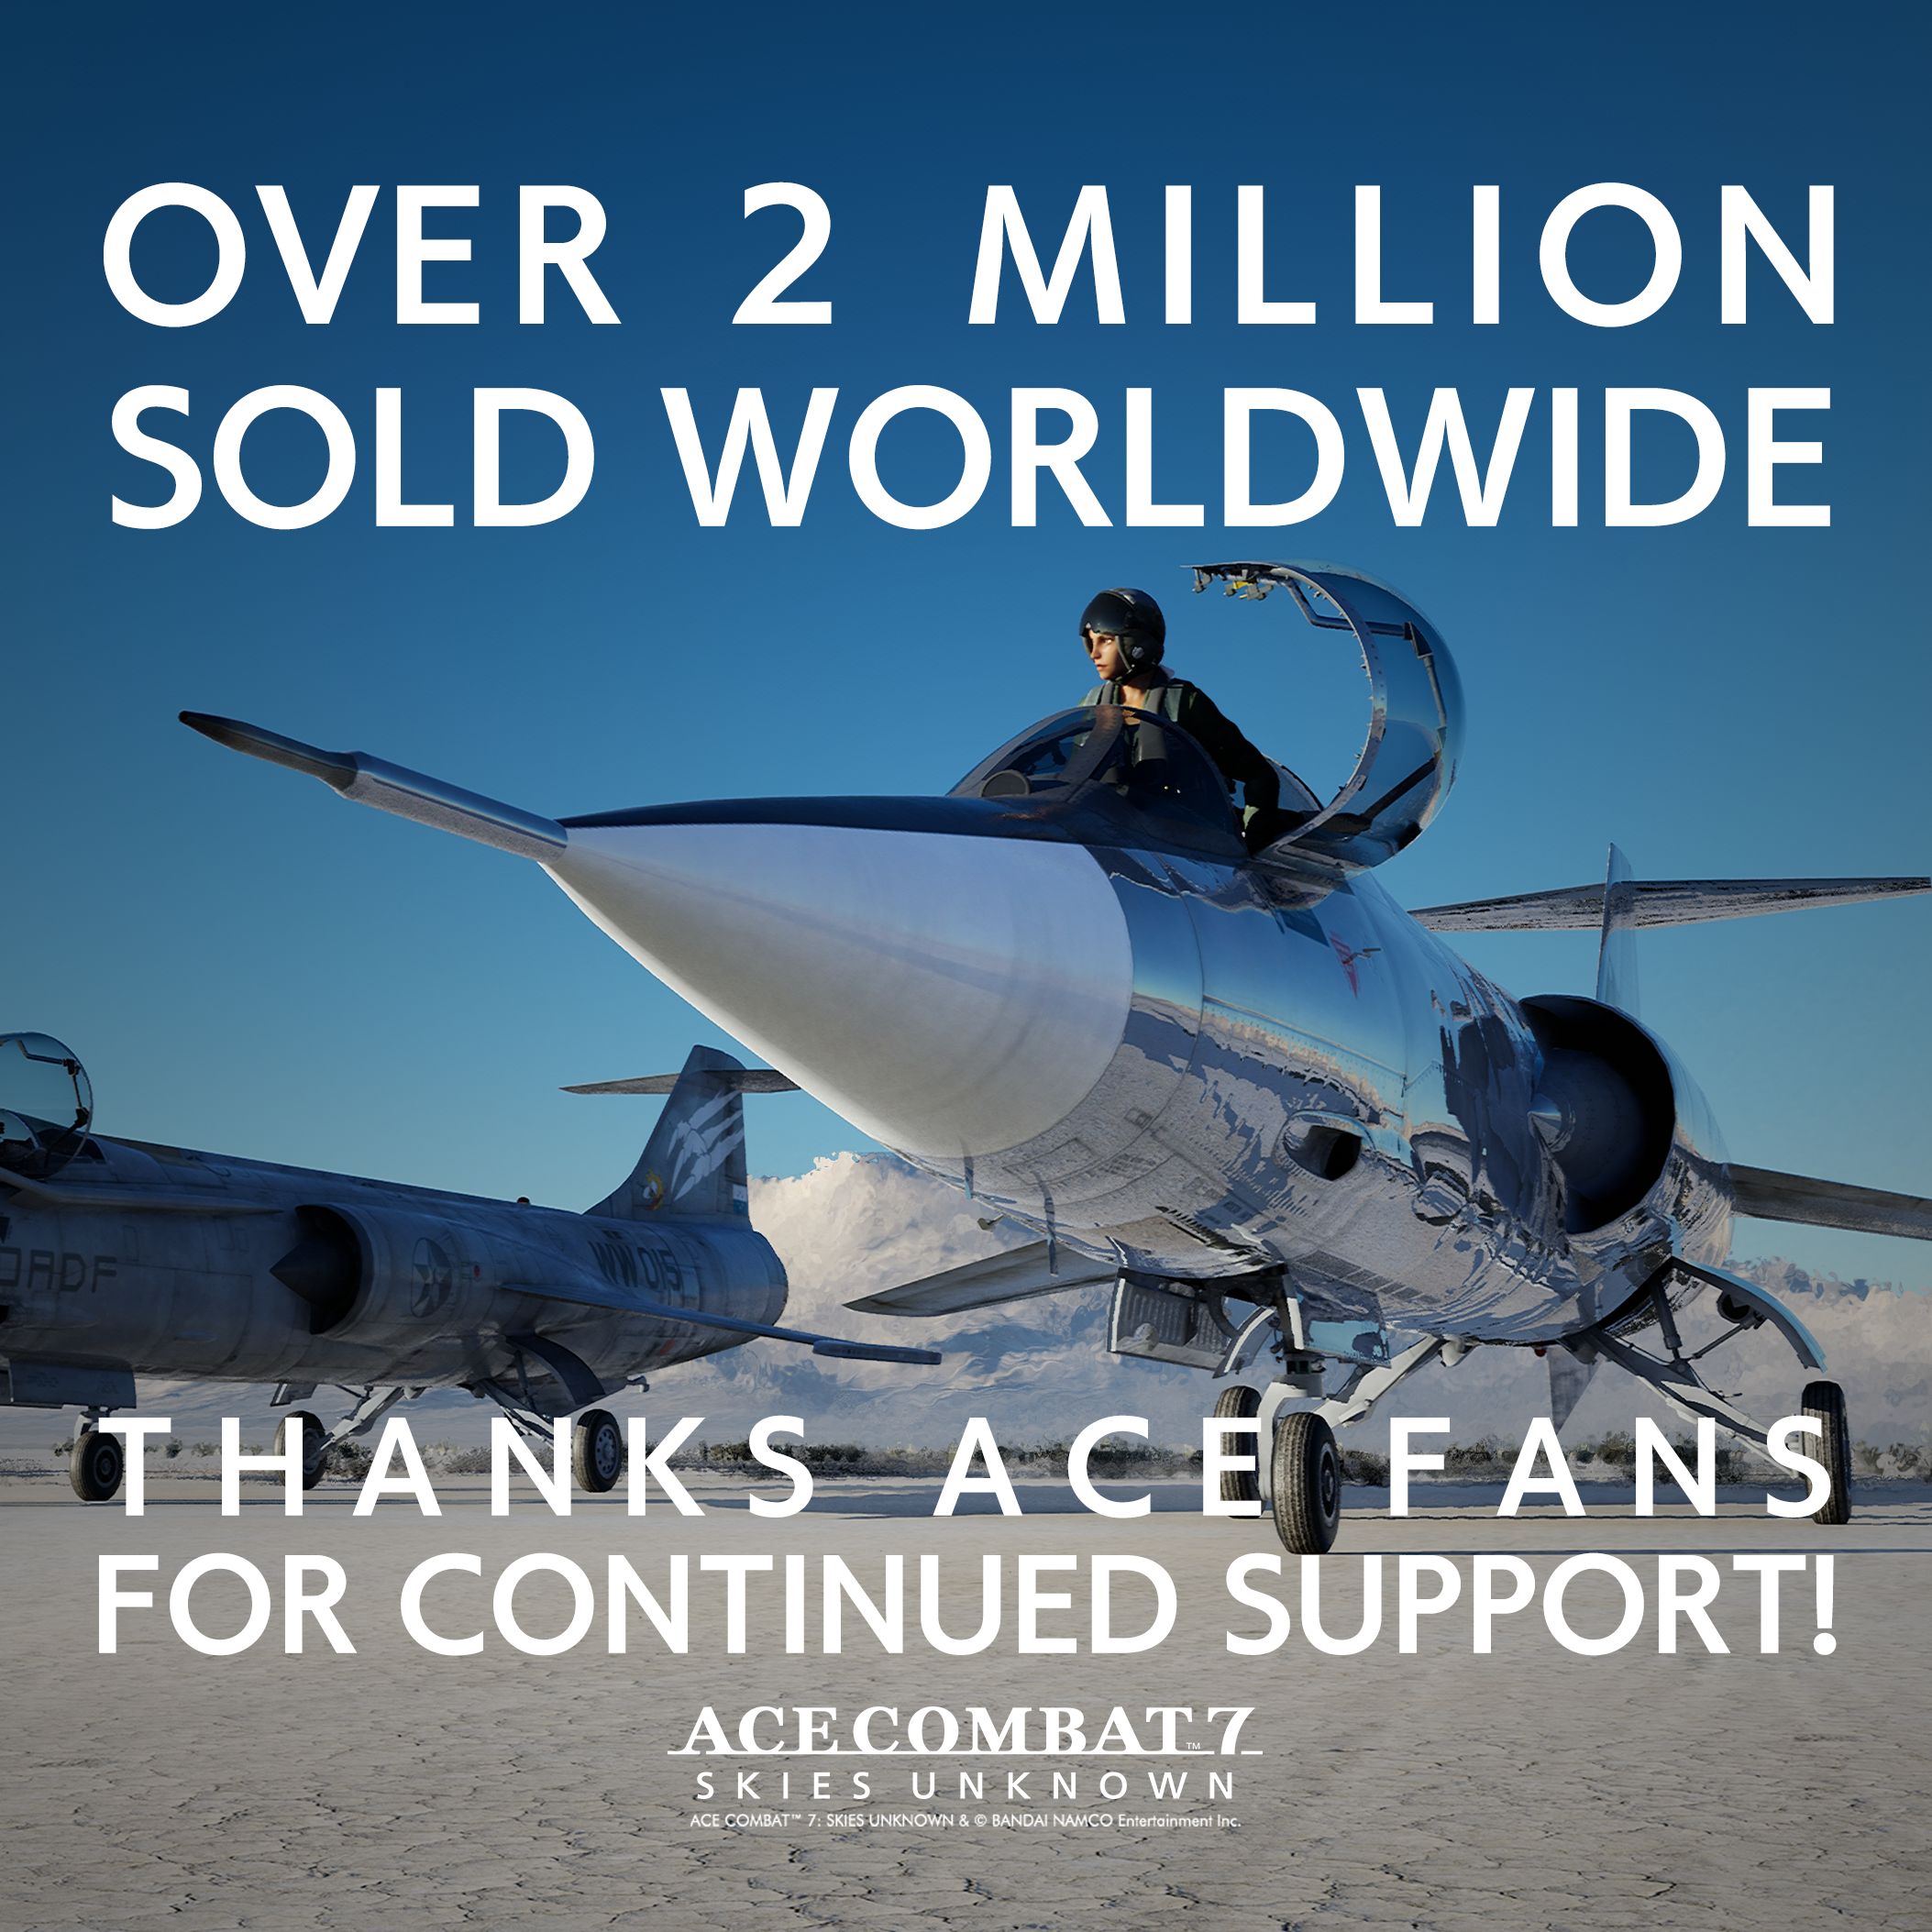 Ace Combat 7: Skies Unknown shipments and digital sales top two